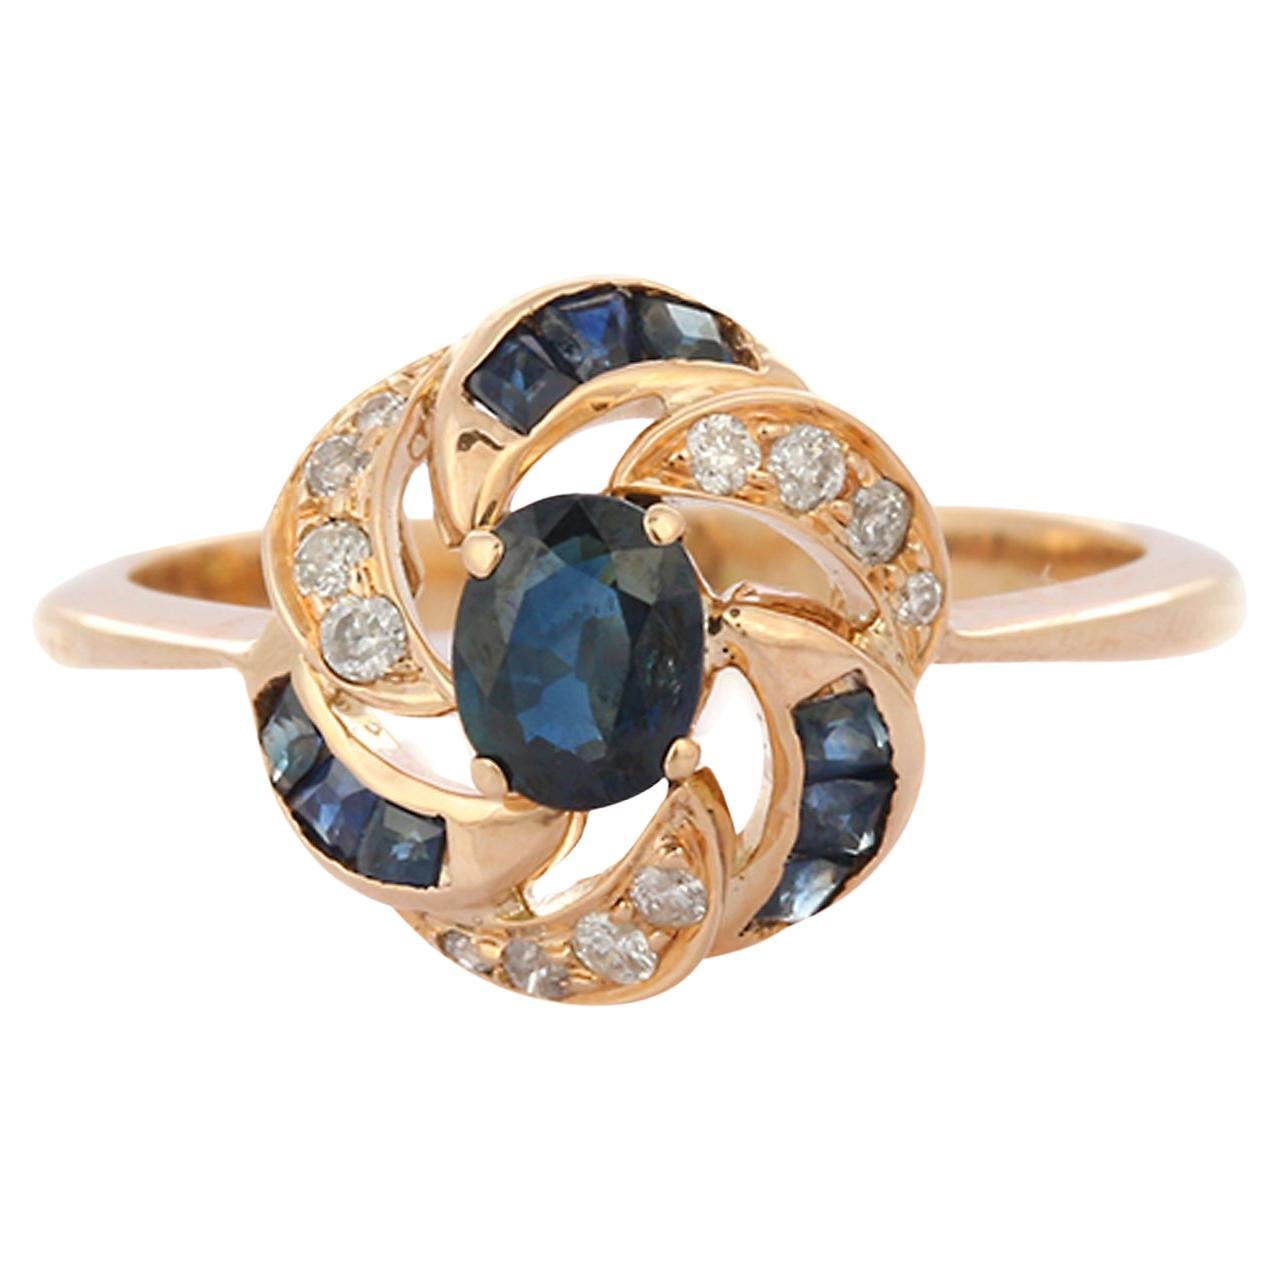 Im Angebot: Enticing Sapphire Diamond Floral Bridal Ring in 14K Solid Gelbgold ()